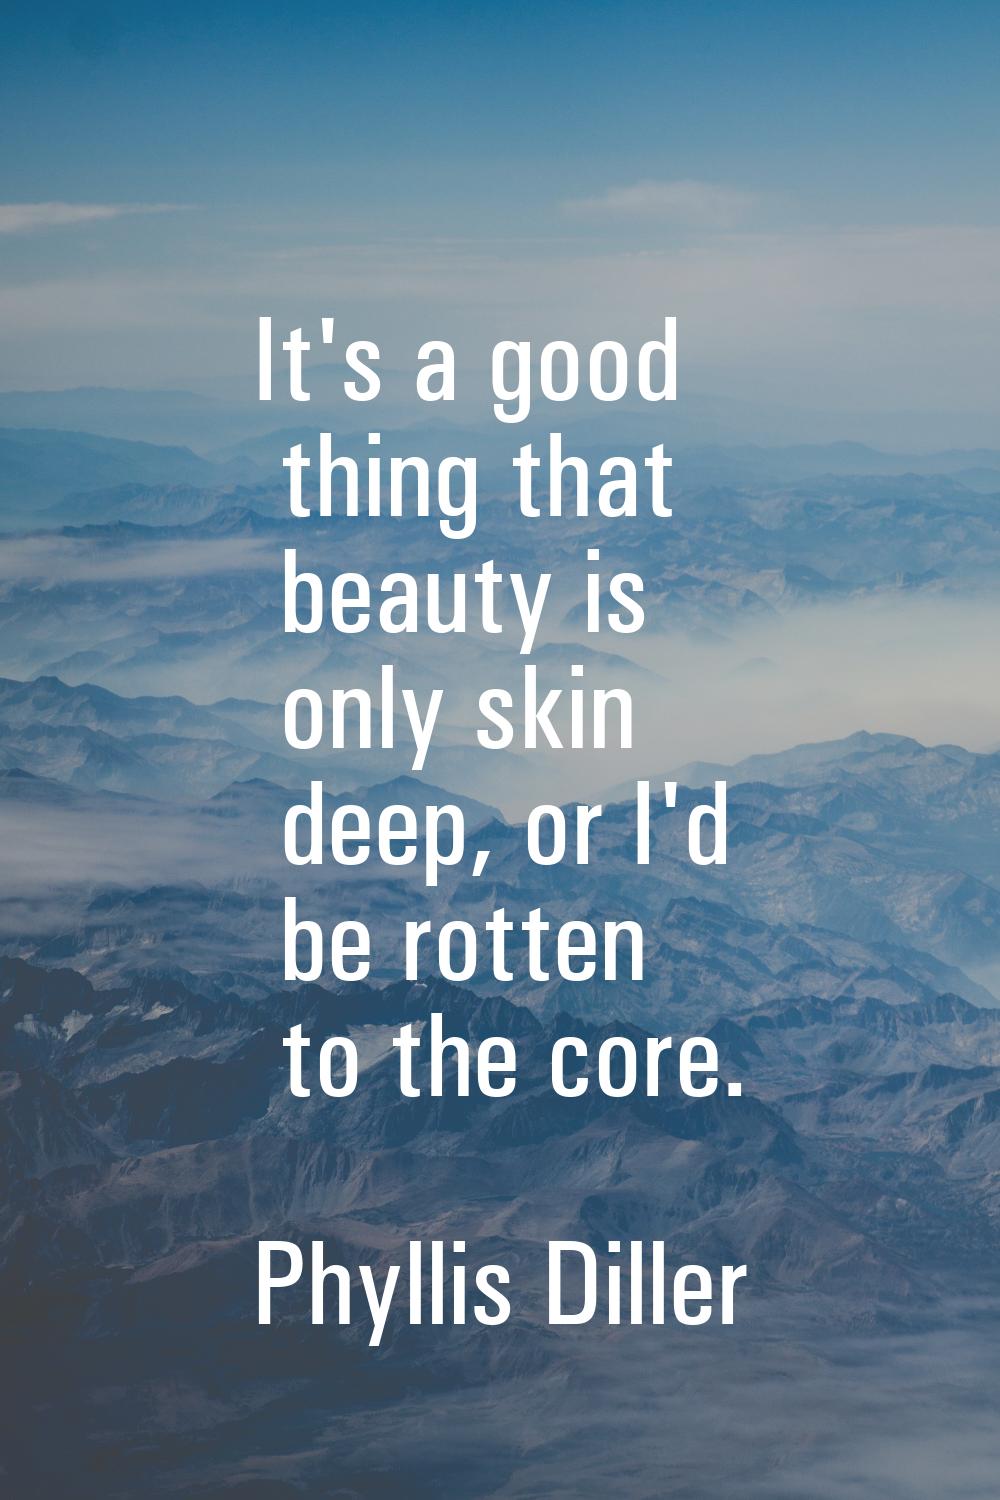 It's a good thing that beauty is only skin deep, or I'd be rotten to the core.